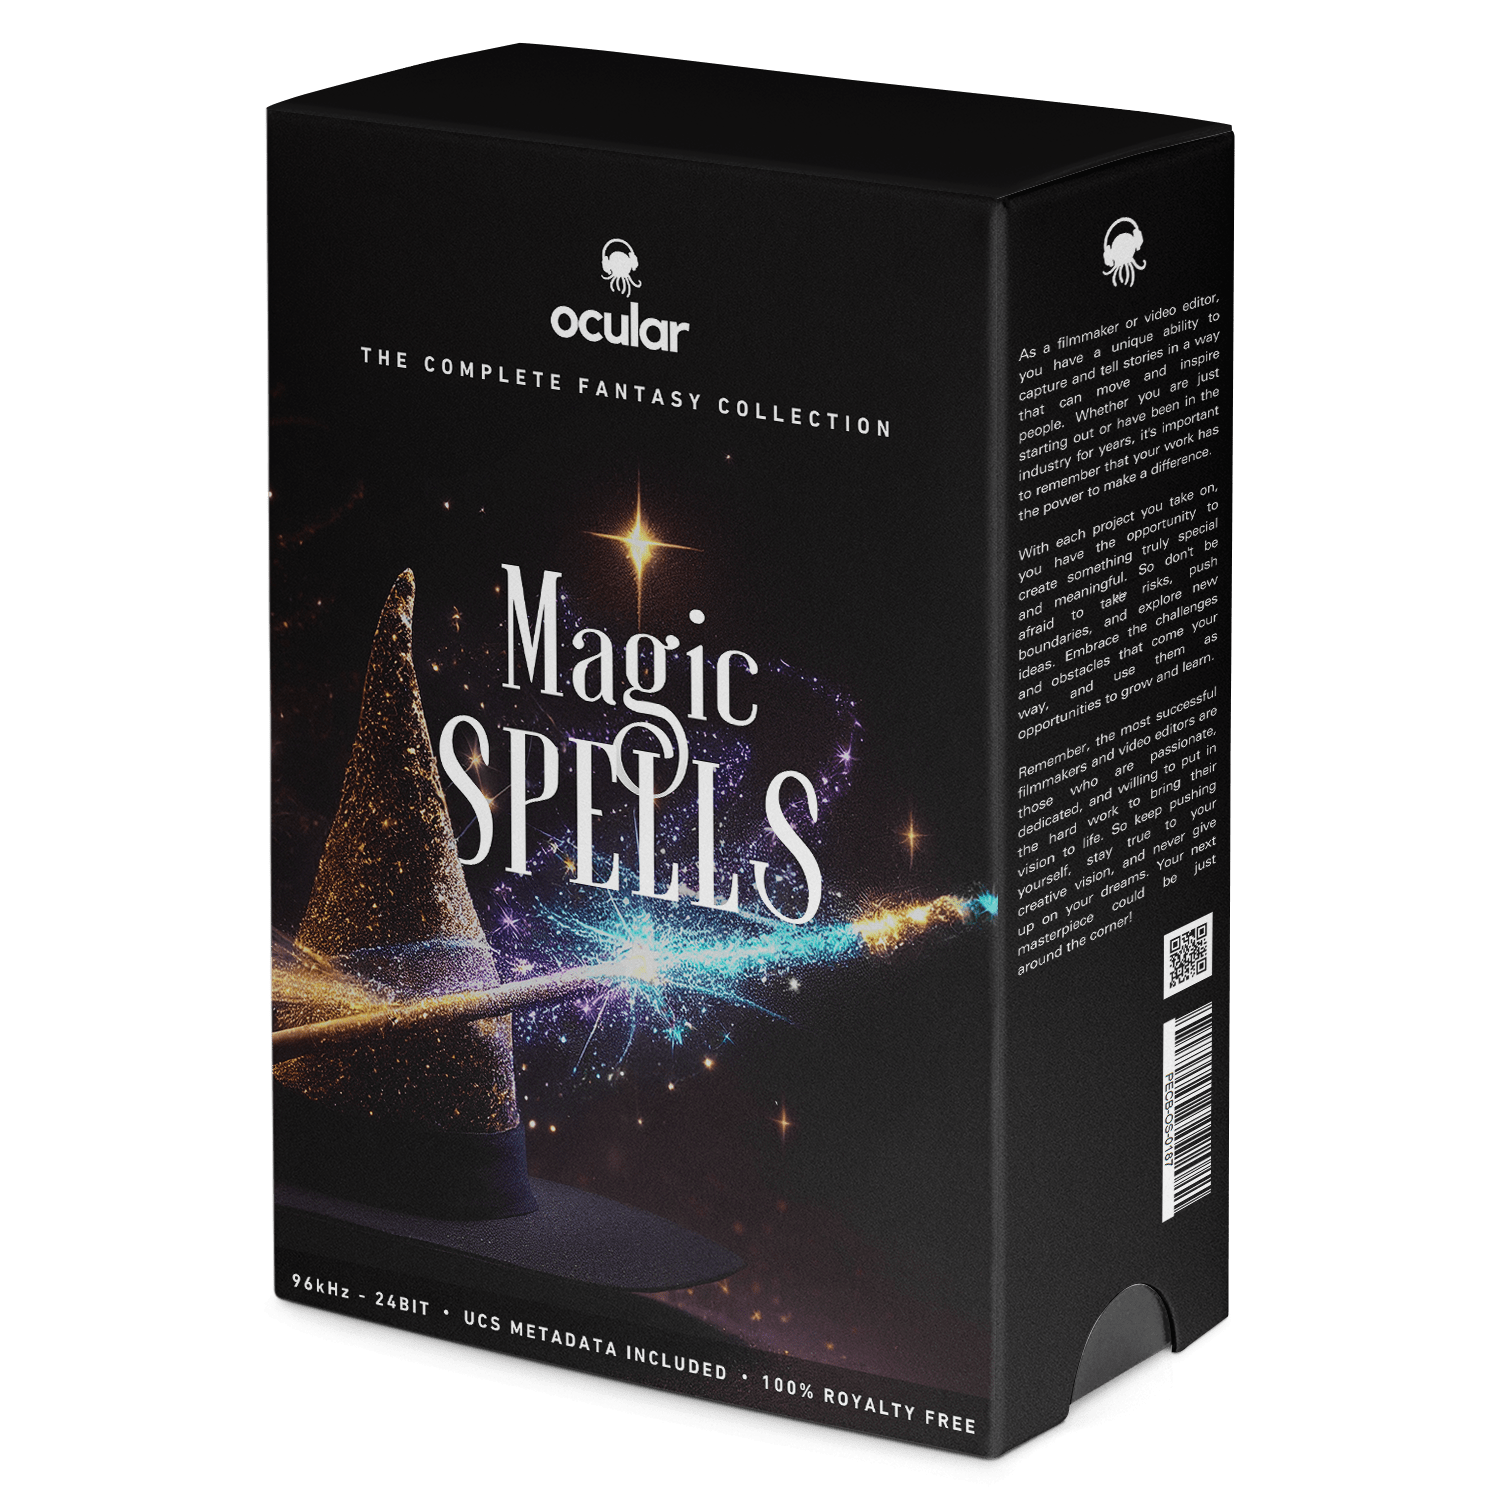 Magic Spells Sound Effects for filmmaking and video editing.